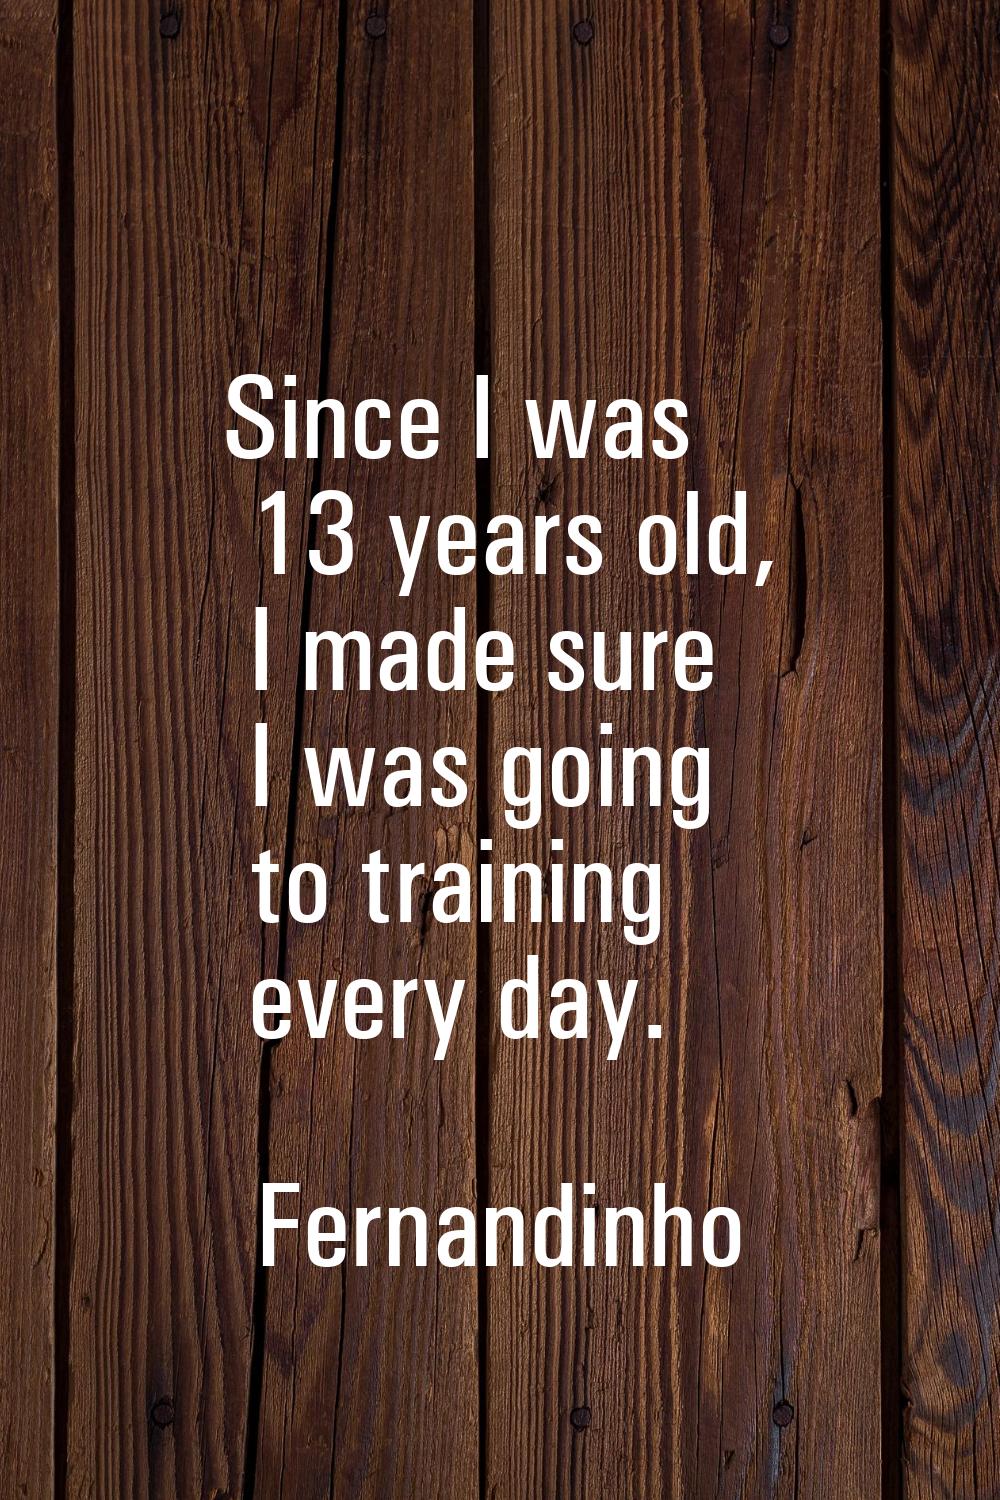 Since I was 13 years old, I made sure I was going to training every day.